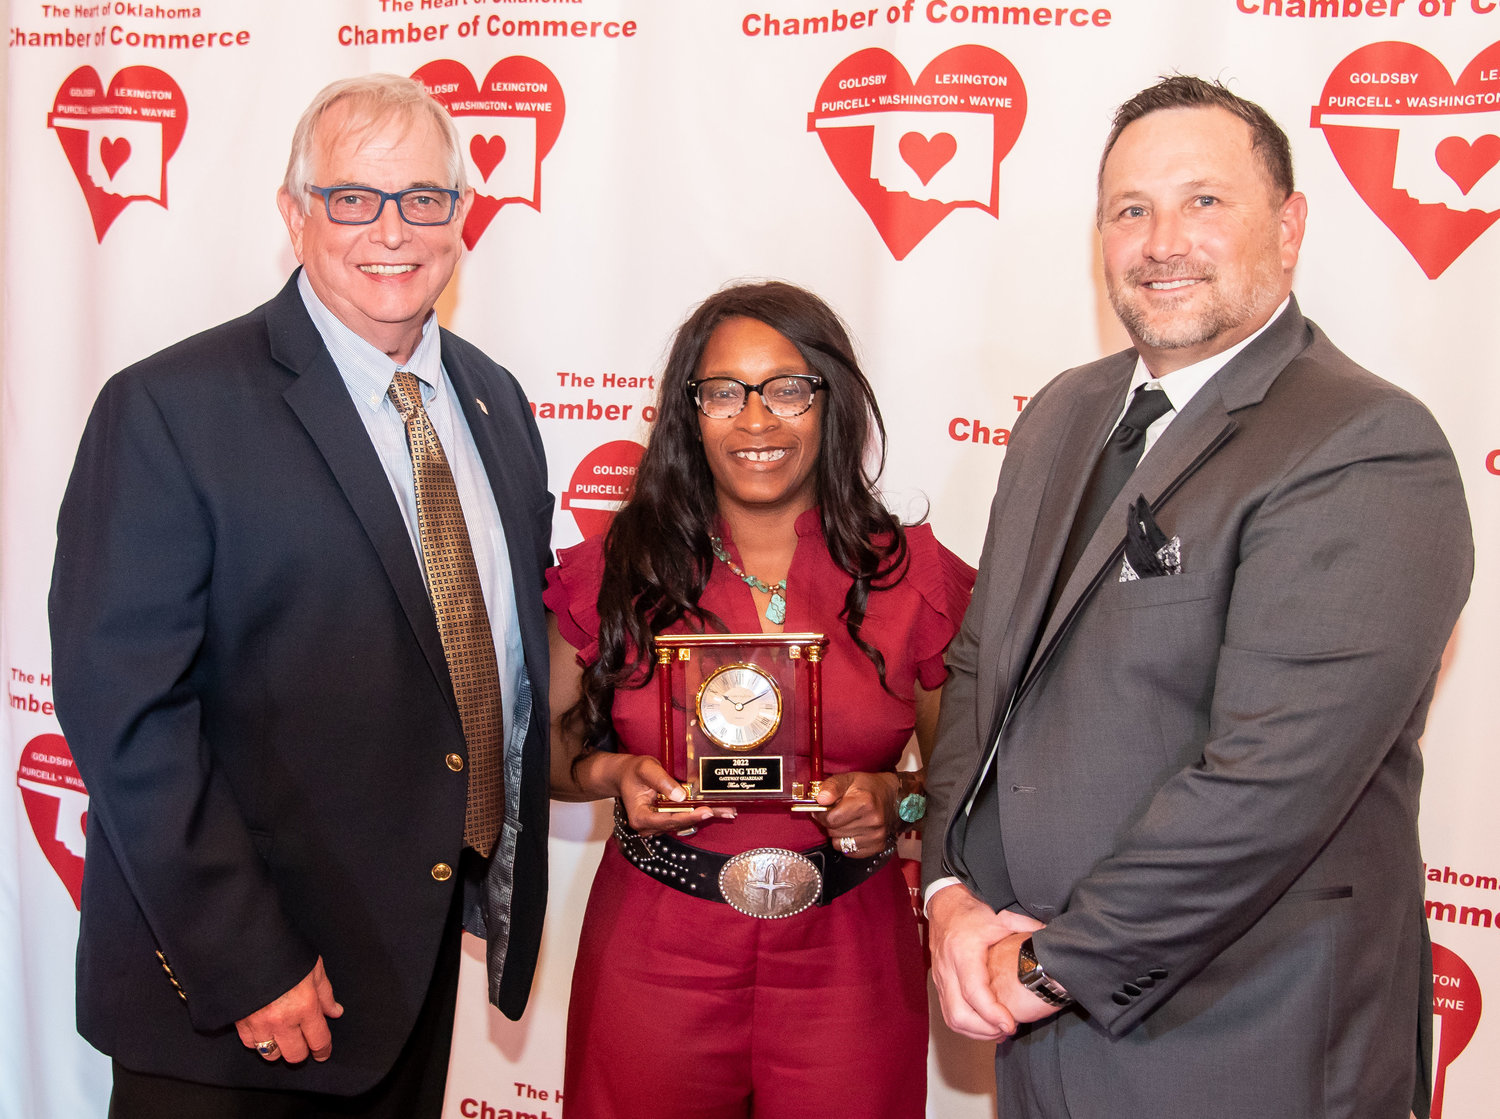 City Councilwoman Theda Engert was honored at the chamber banquet as the Gateway Guardian Award winner. Making the presentation were City Manager Dale Bunn and Chamber President Chris Goldsby. The Gateway Guardian Award is given annually to a person who demonstrates leadership in government.